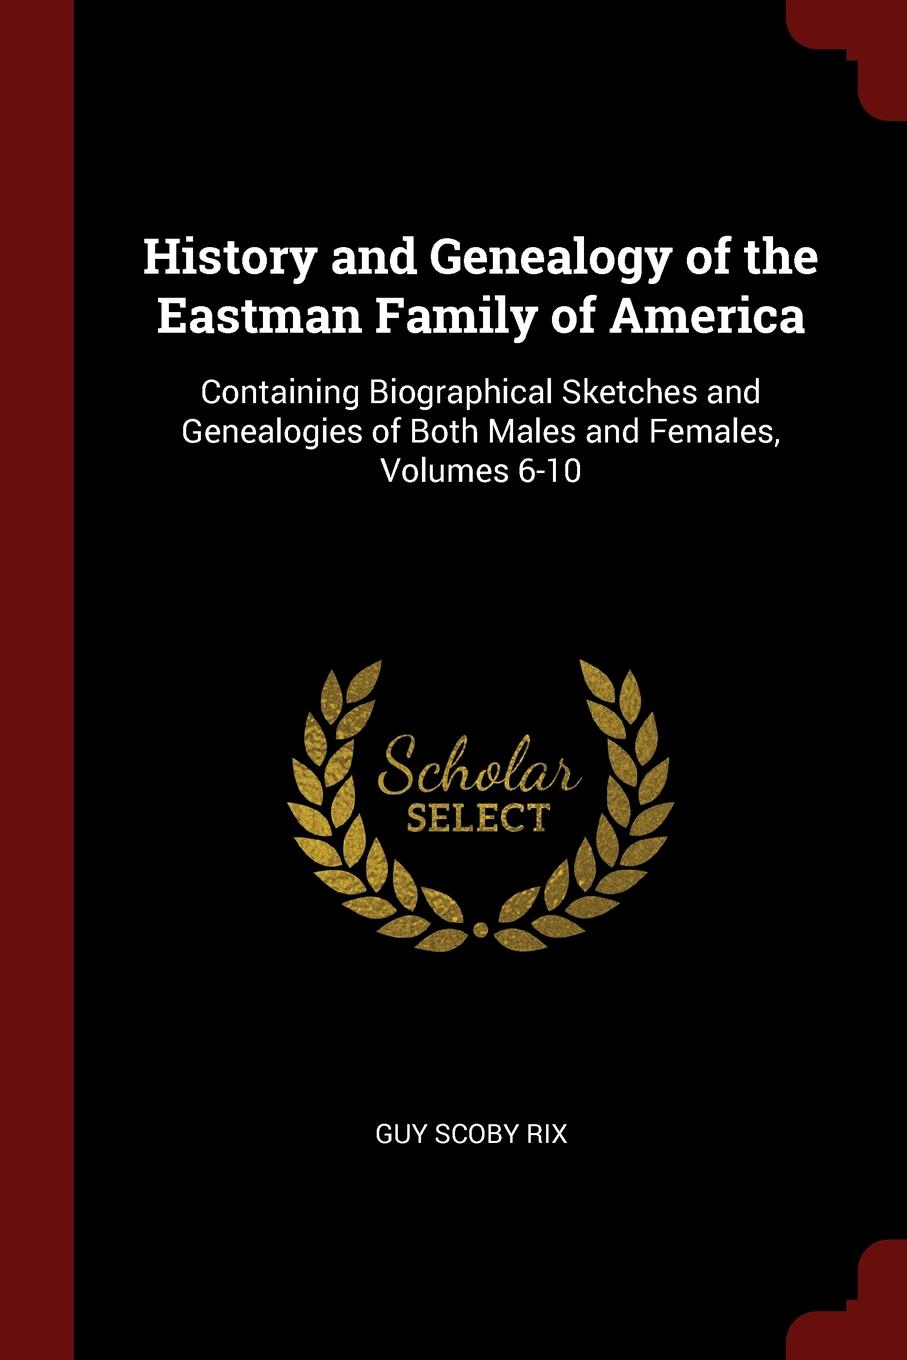 History and Genealogy of the Eastman Family of America. Containing Biographical Sketches and Genealogies of Both Males and Females, Volumes 6-10